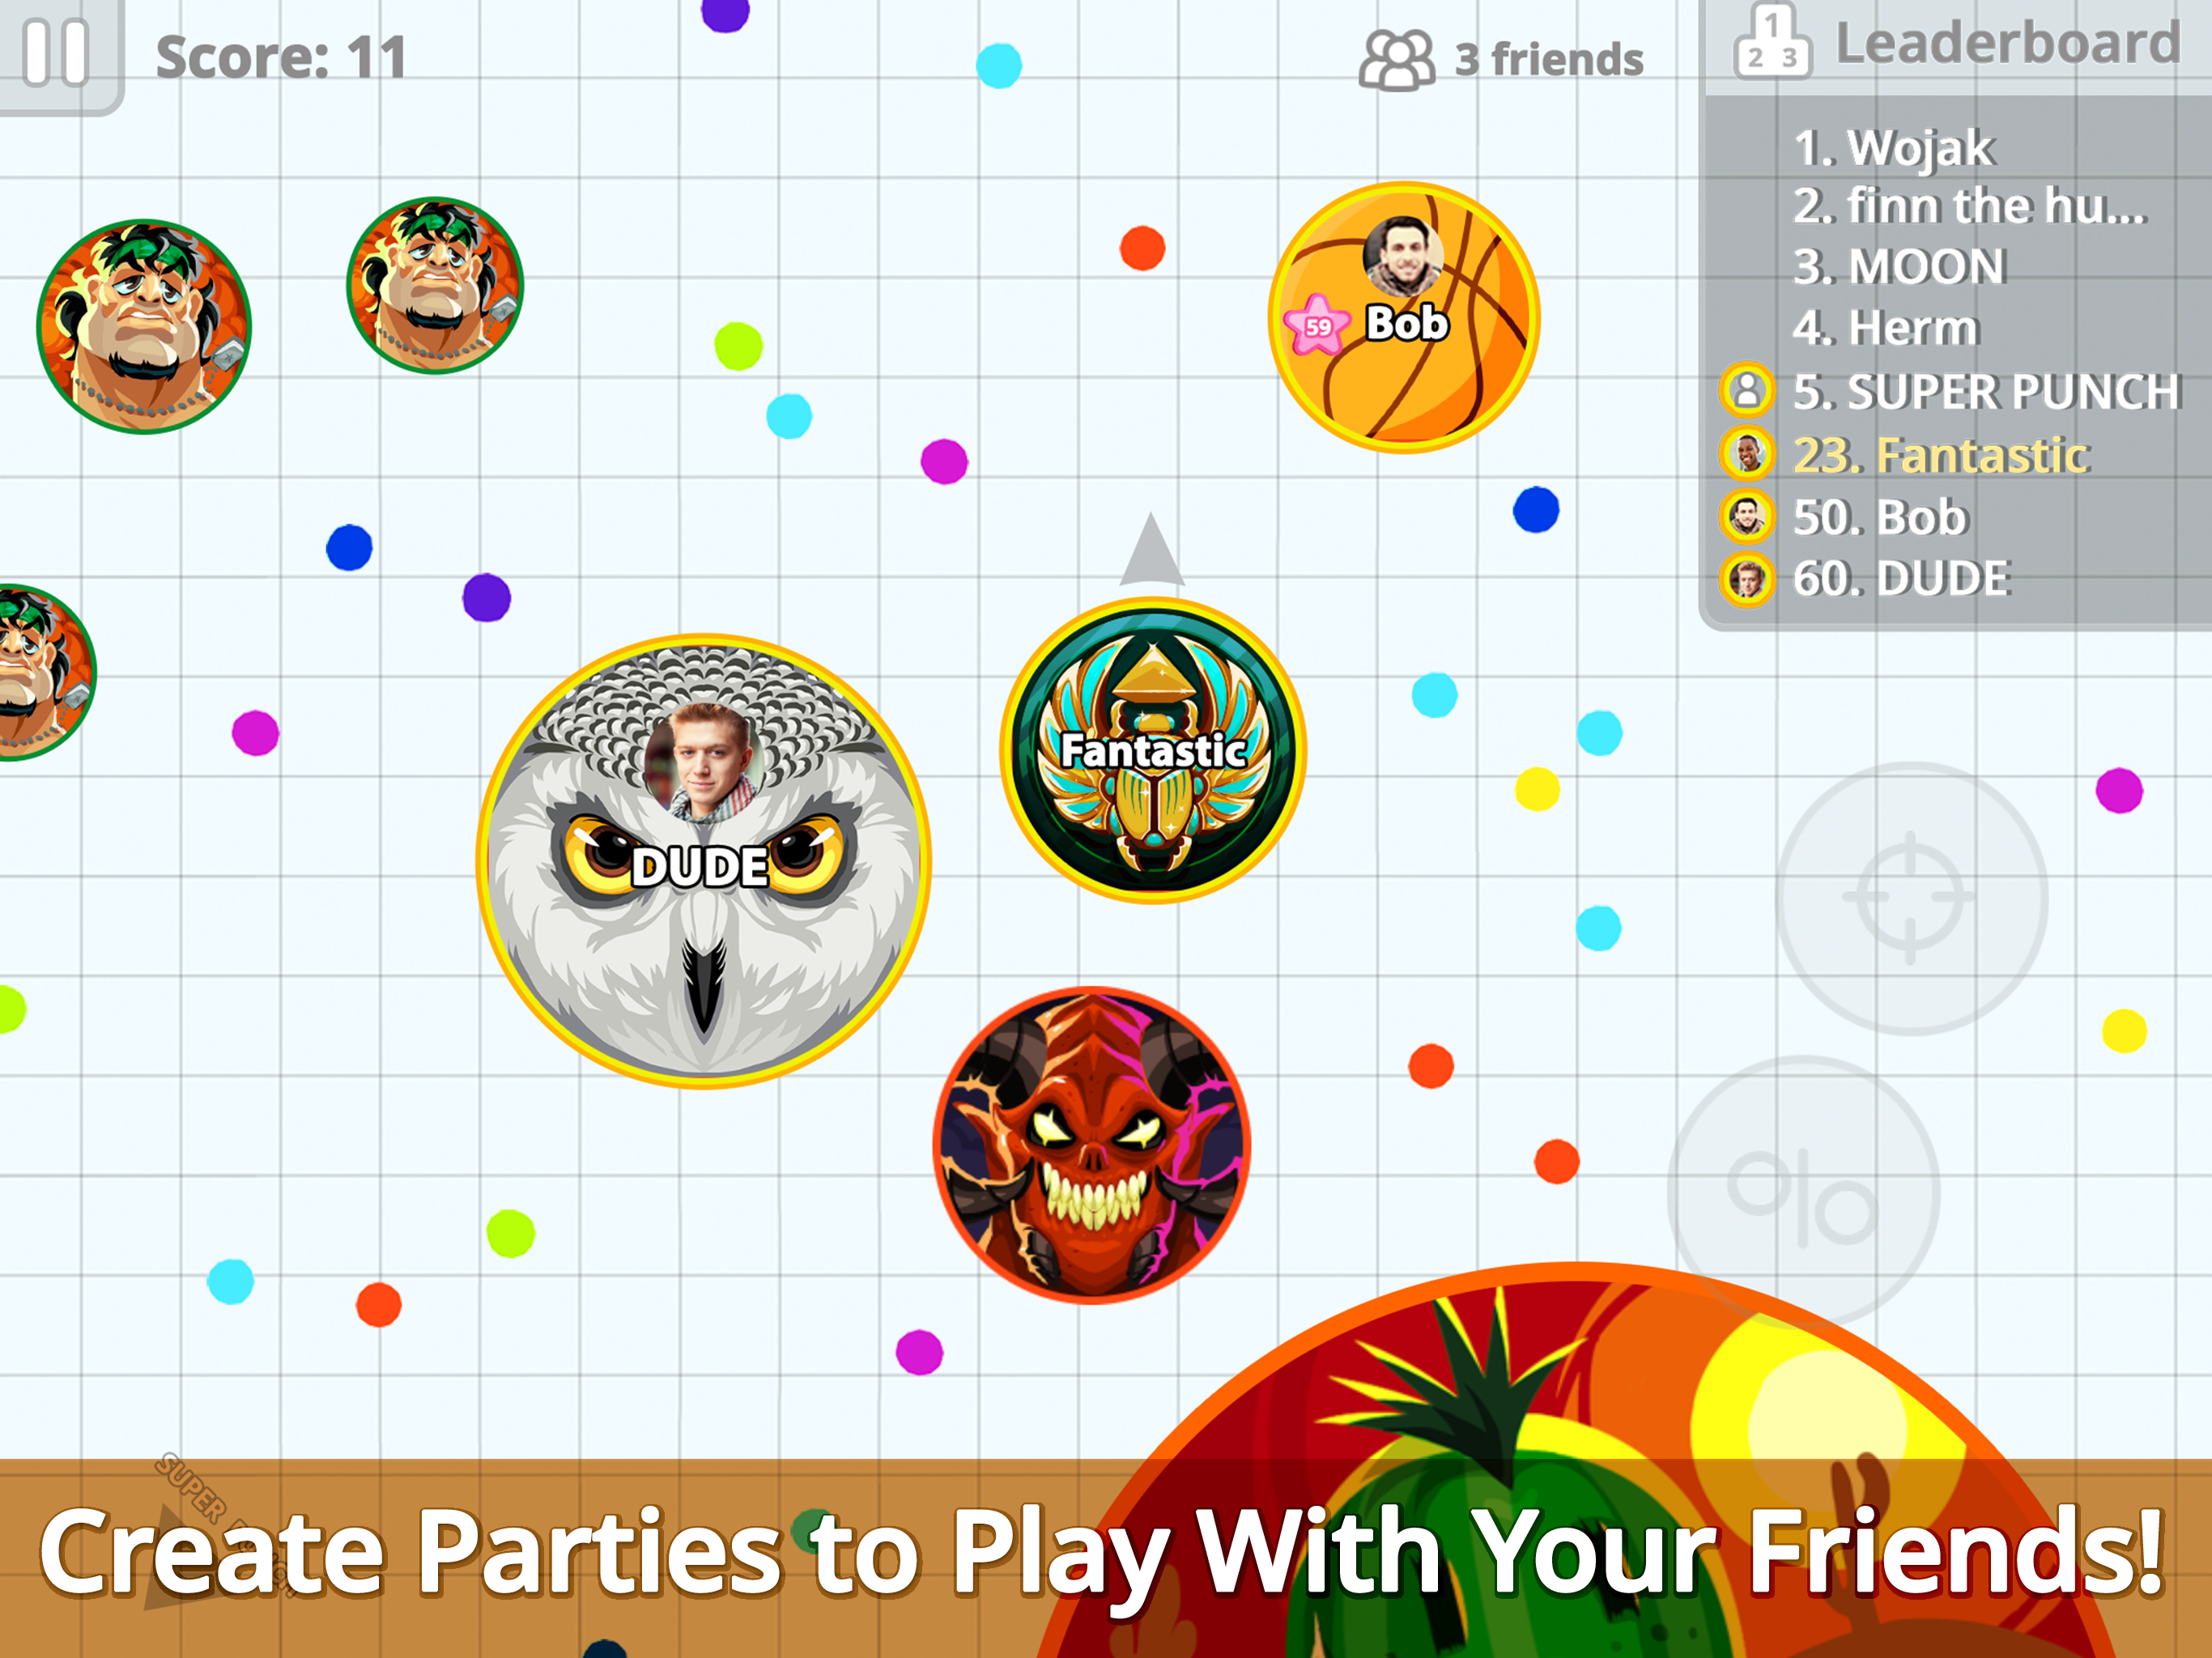 How to play Agar.io, skins, controls, and the game description